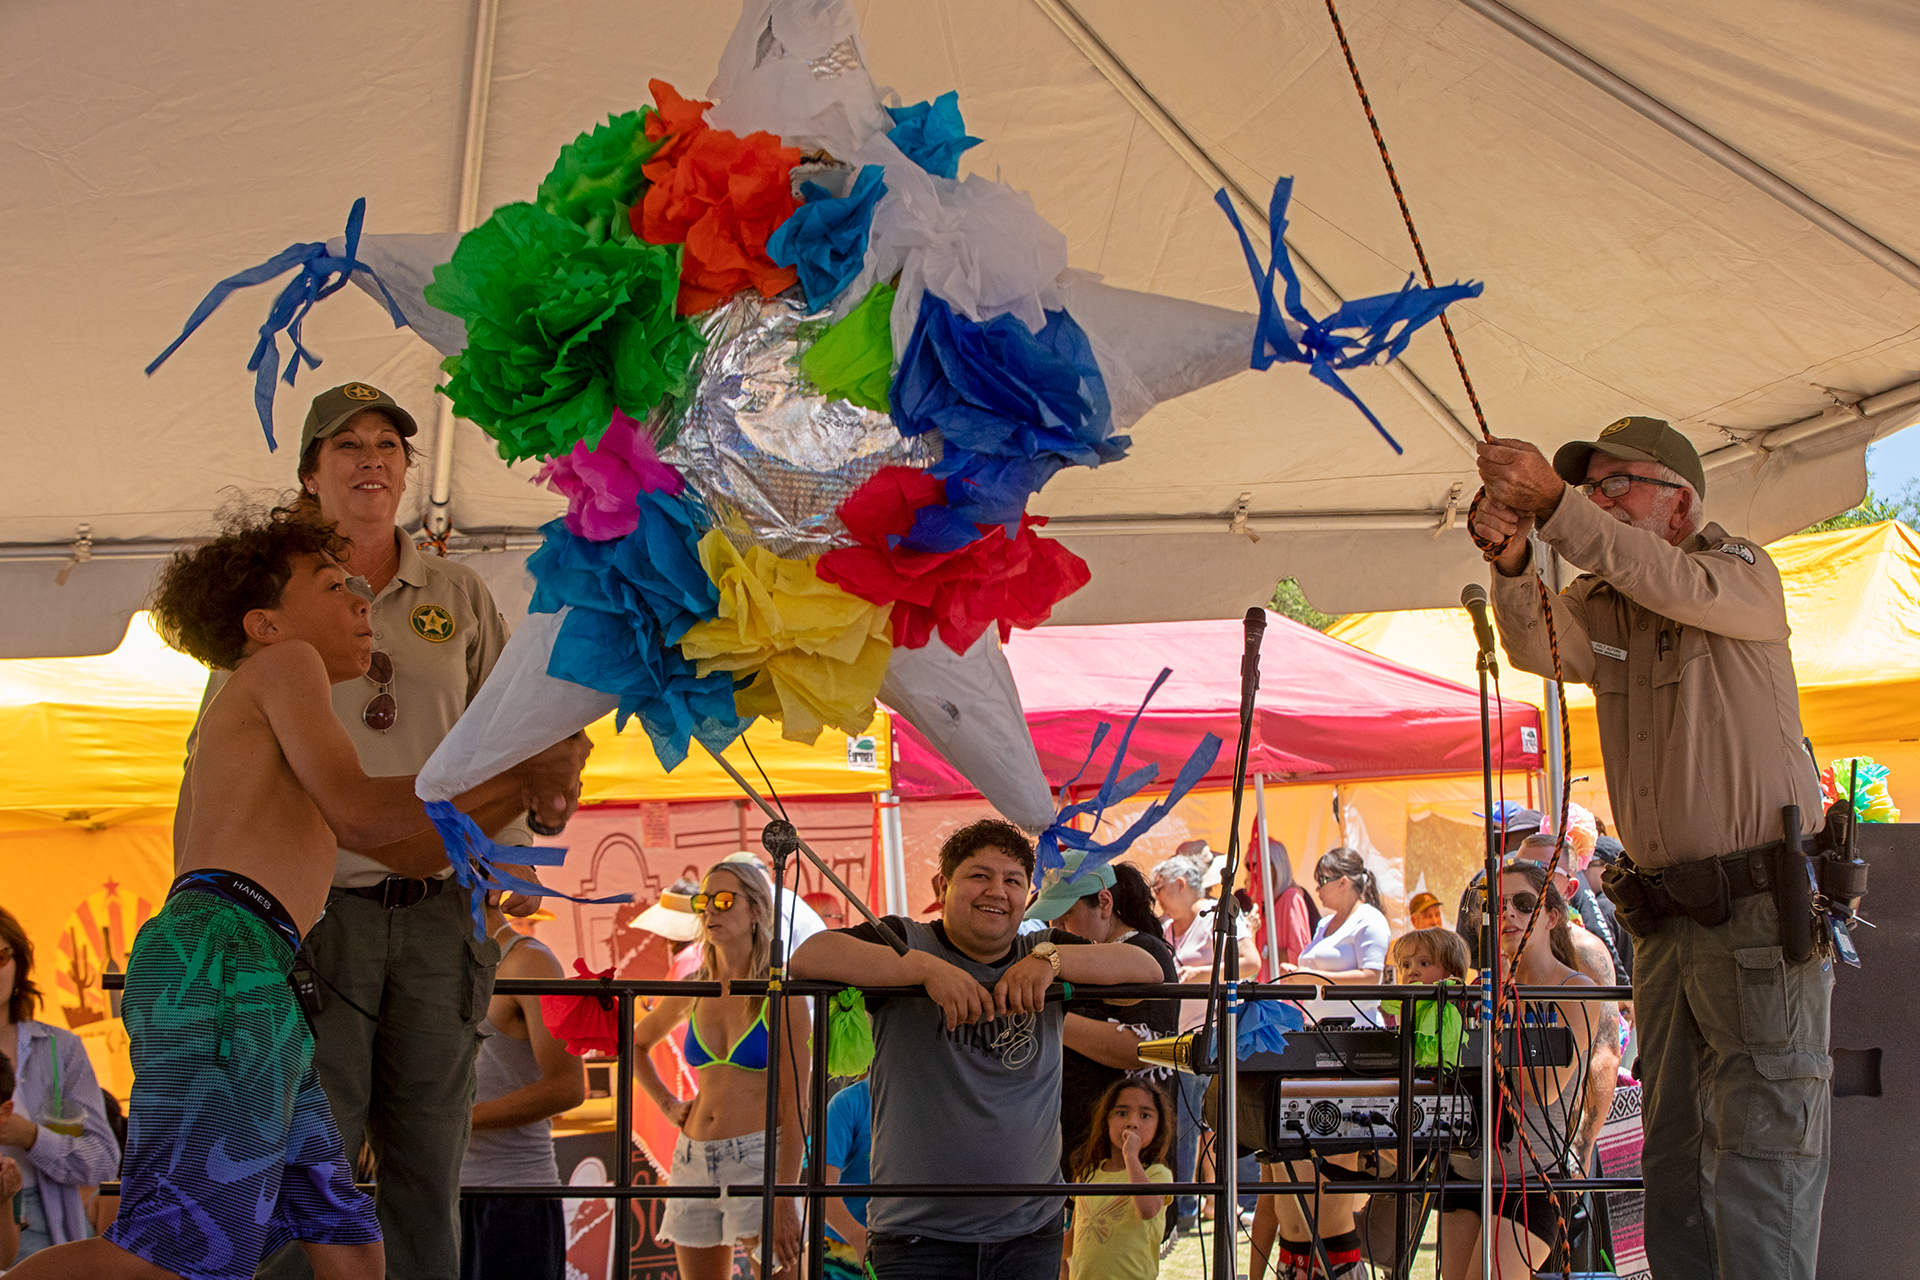 A child swings at a star-shaped multi-colored pinata, as two park rangers and a crowd looks on.